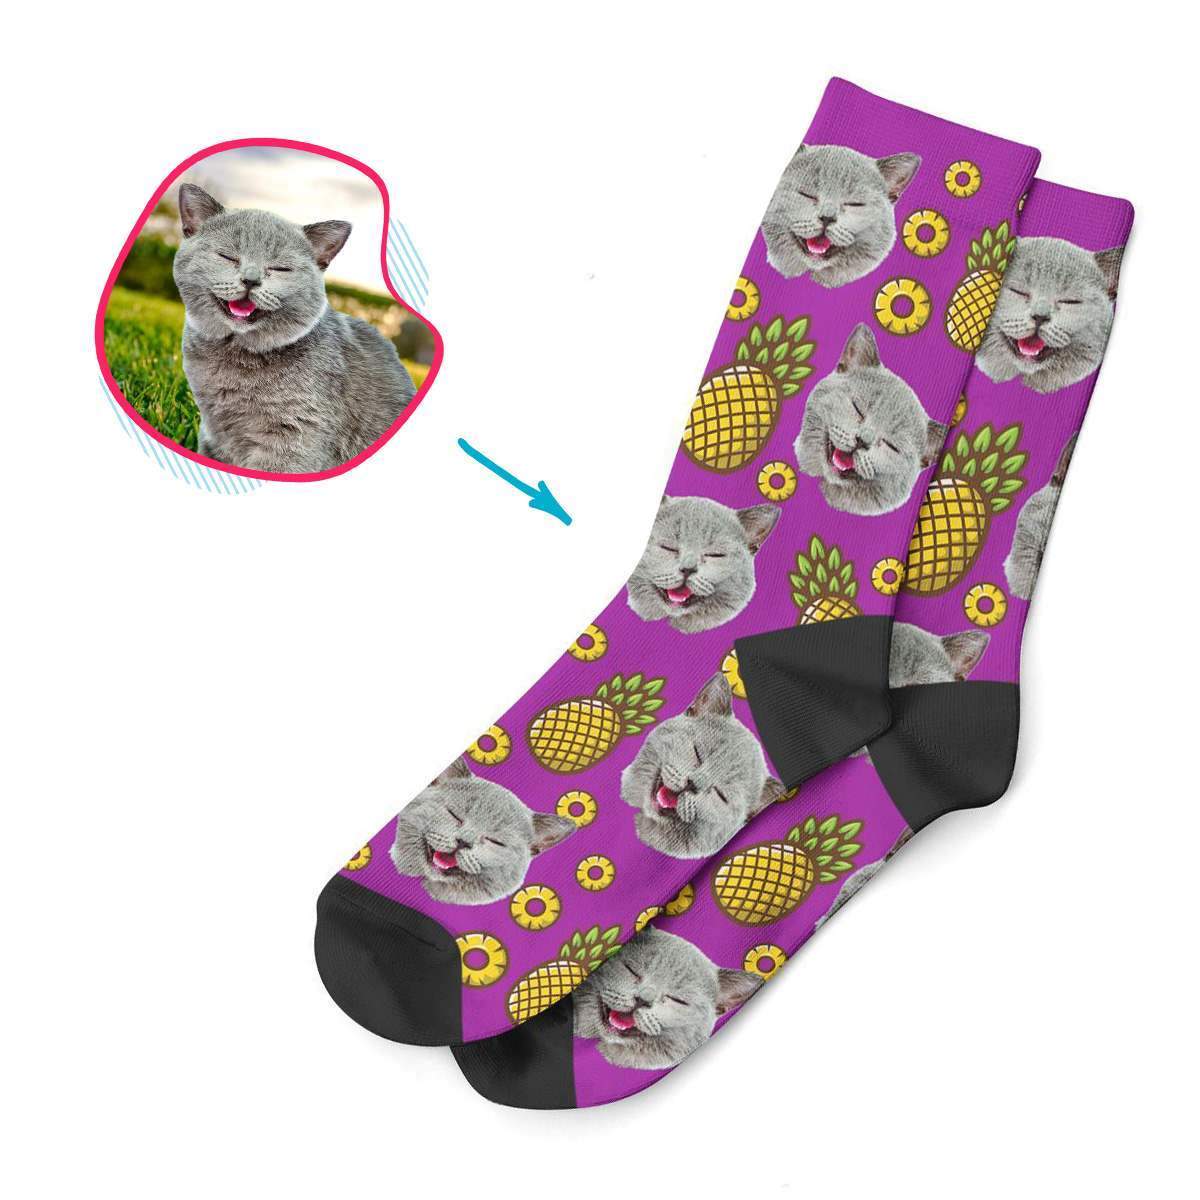 purple Fruits socks personalized with photo of face printed on them